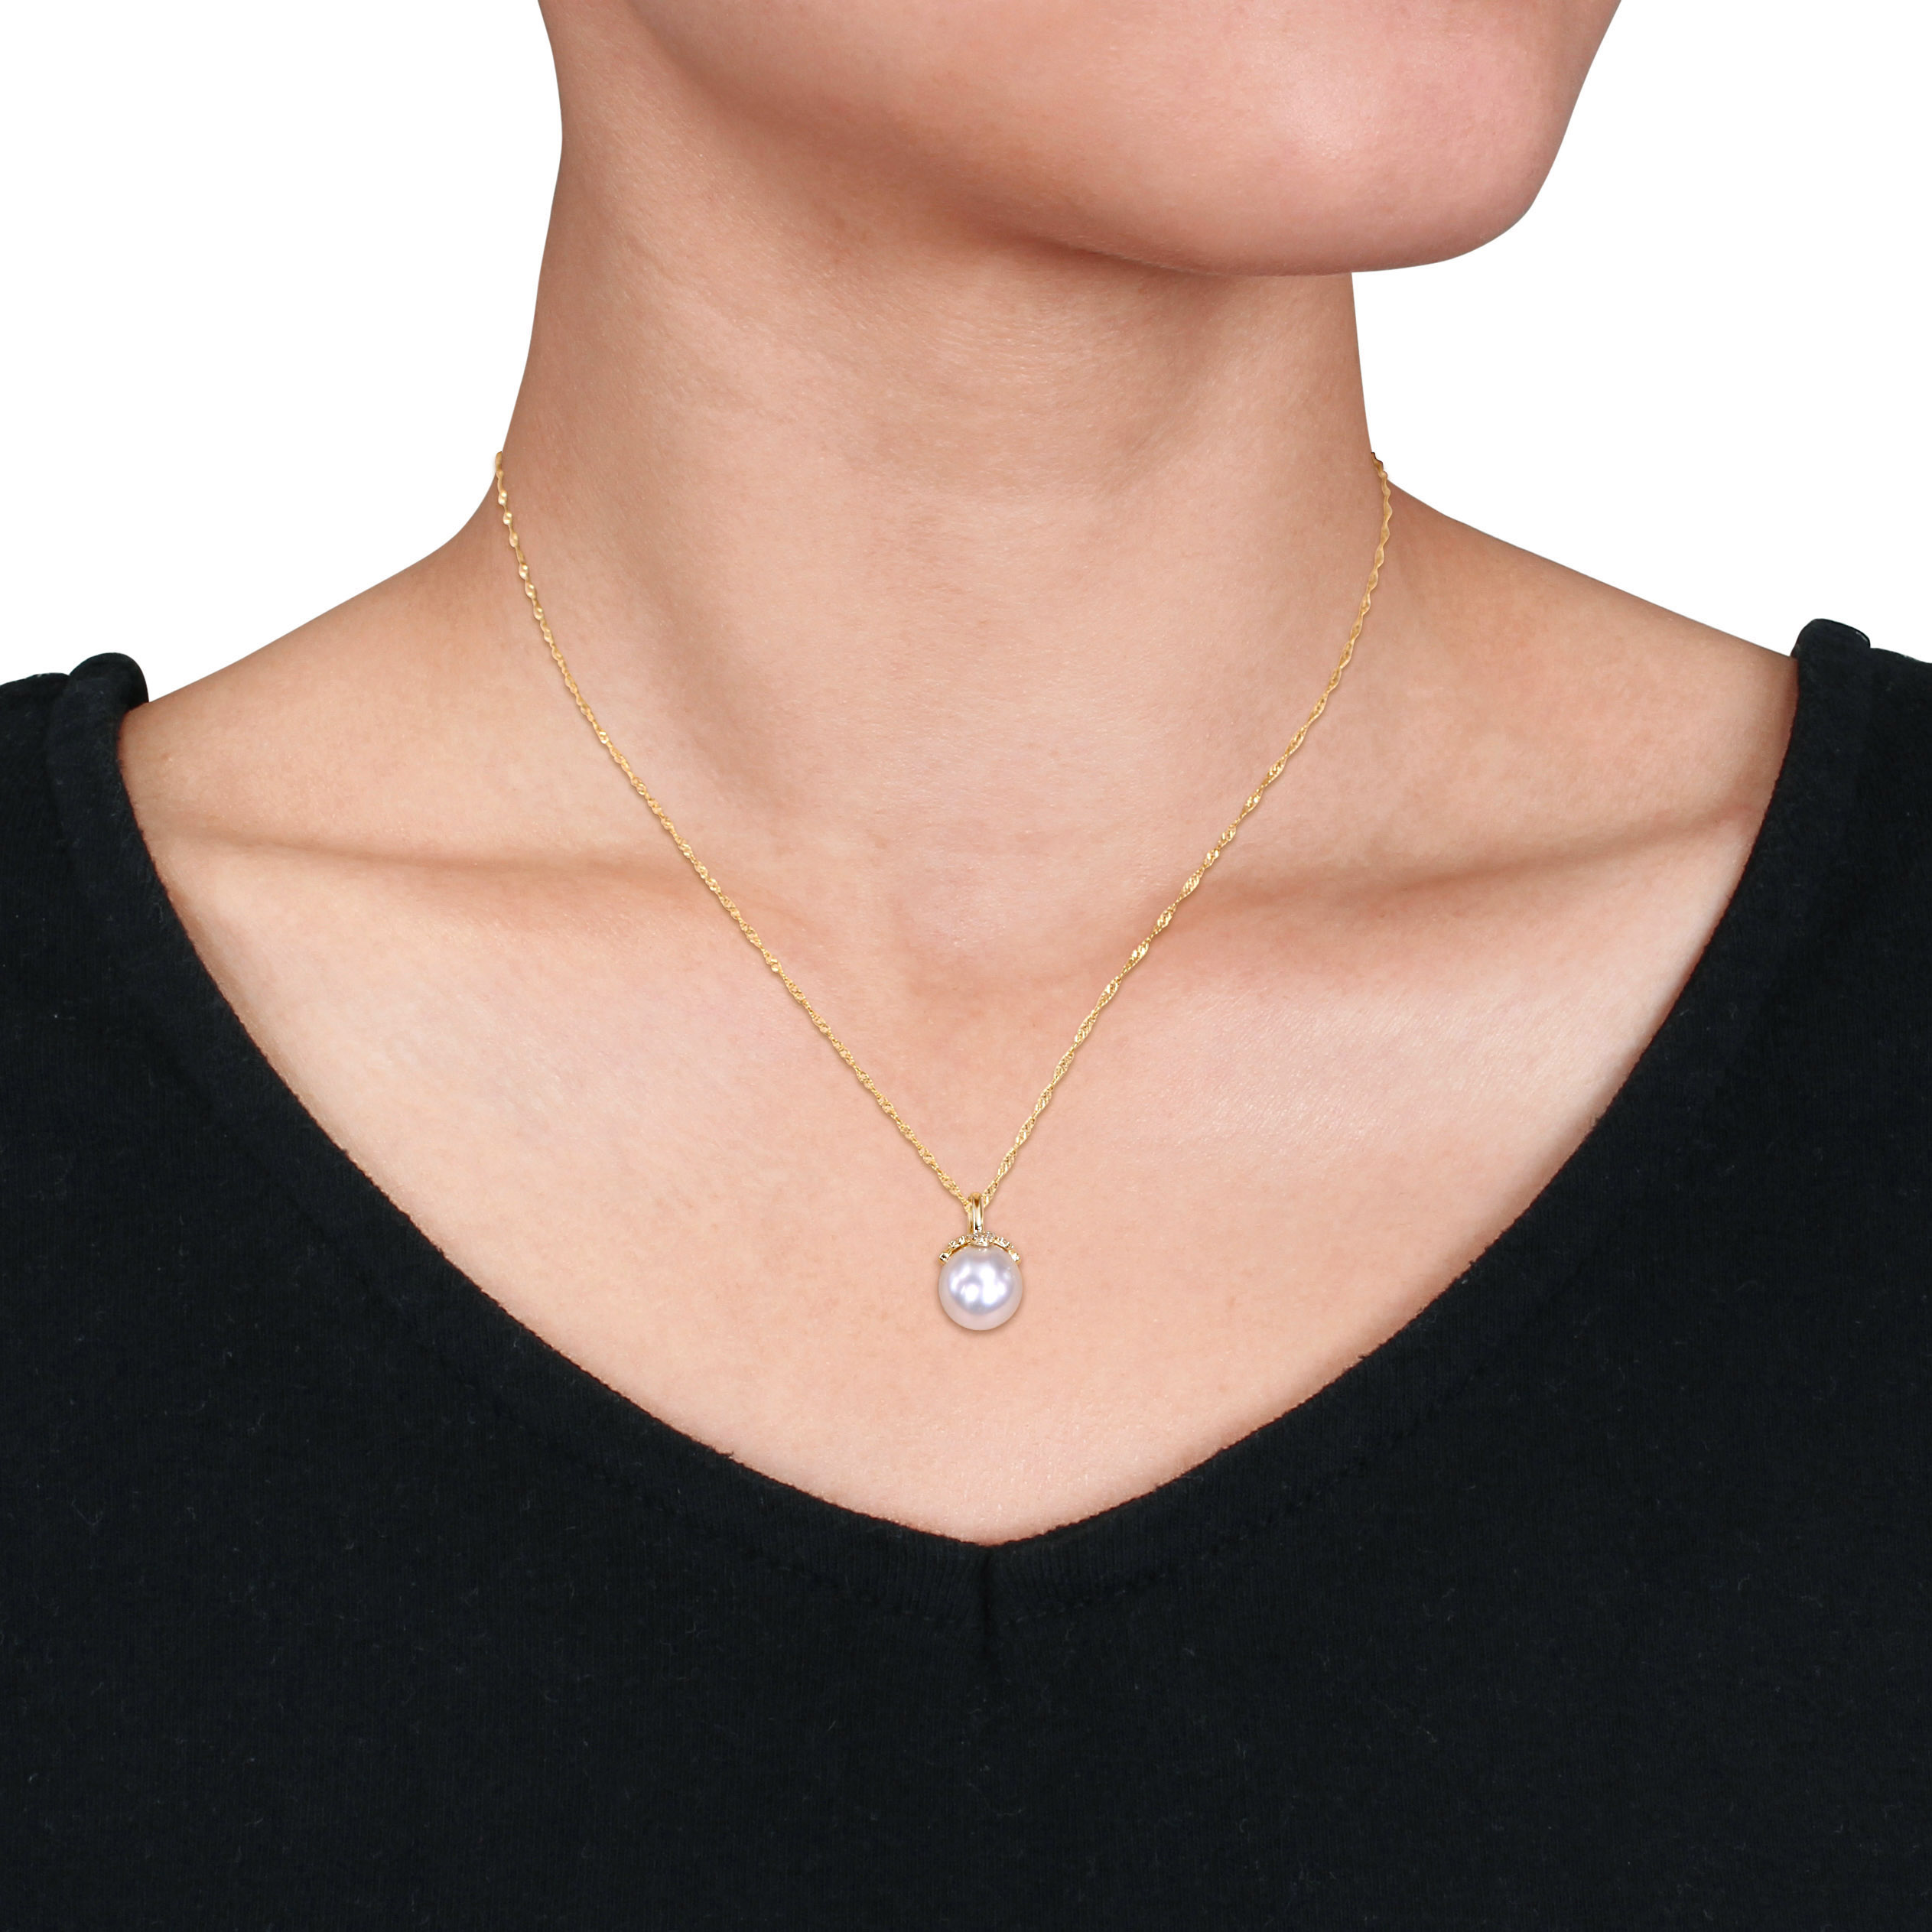 10-10.5 MM South Sea Pearl and Diamond Accent Pendant with Chain in 14k Yellow Gold